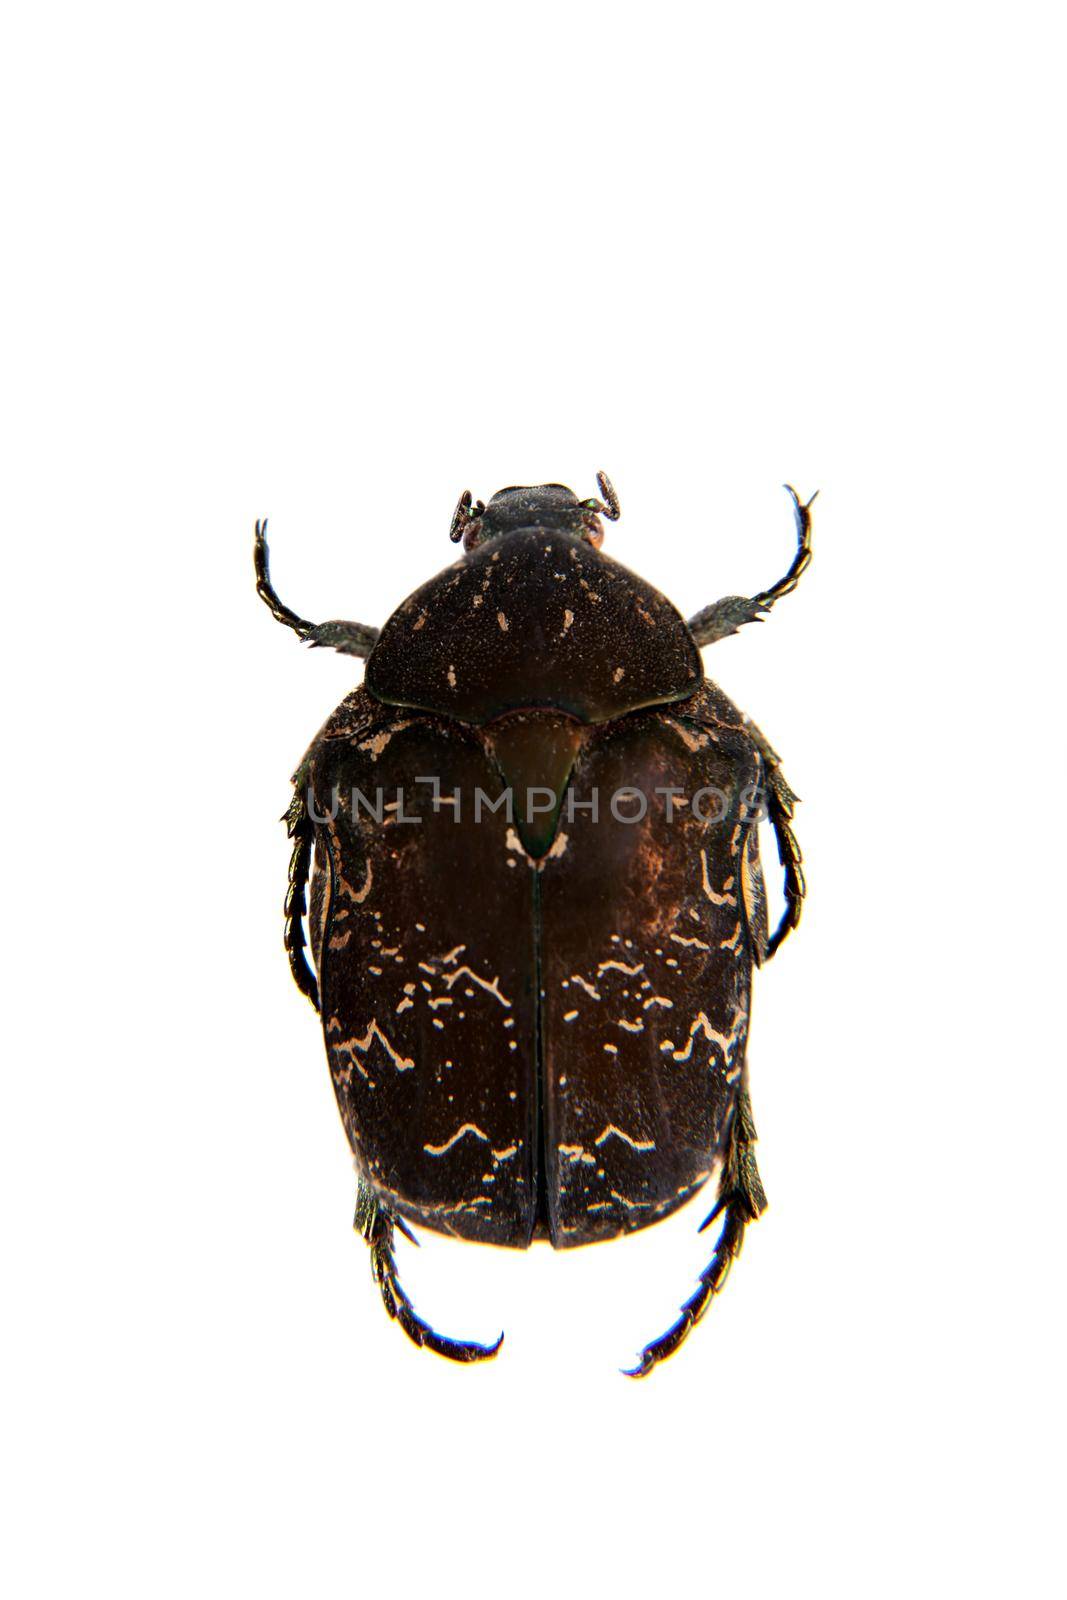 Spotted beetle on the white background by RosaJay